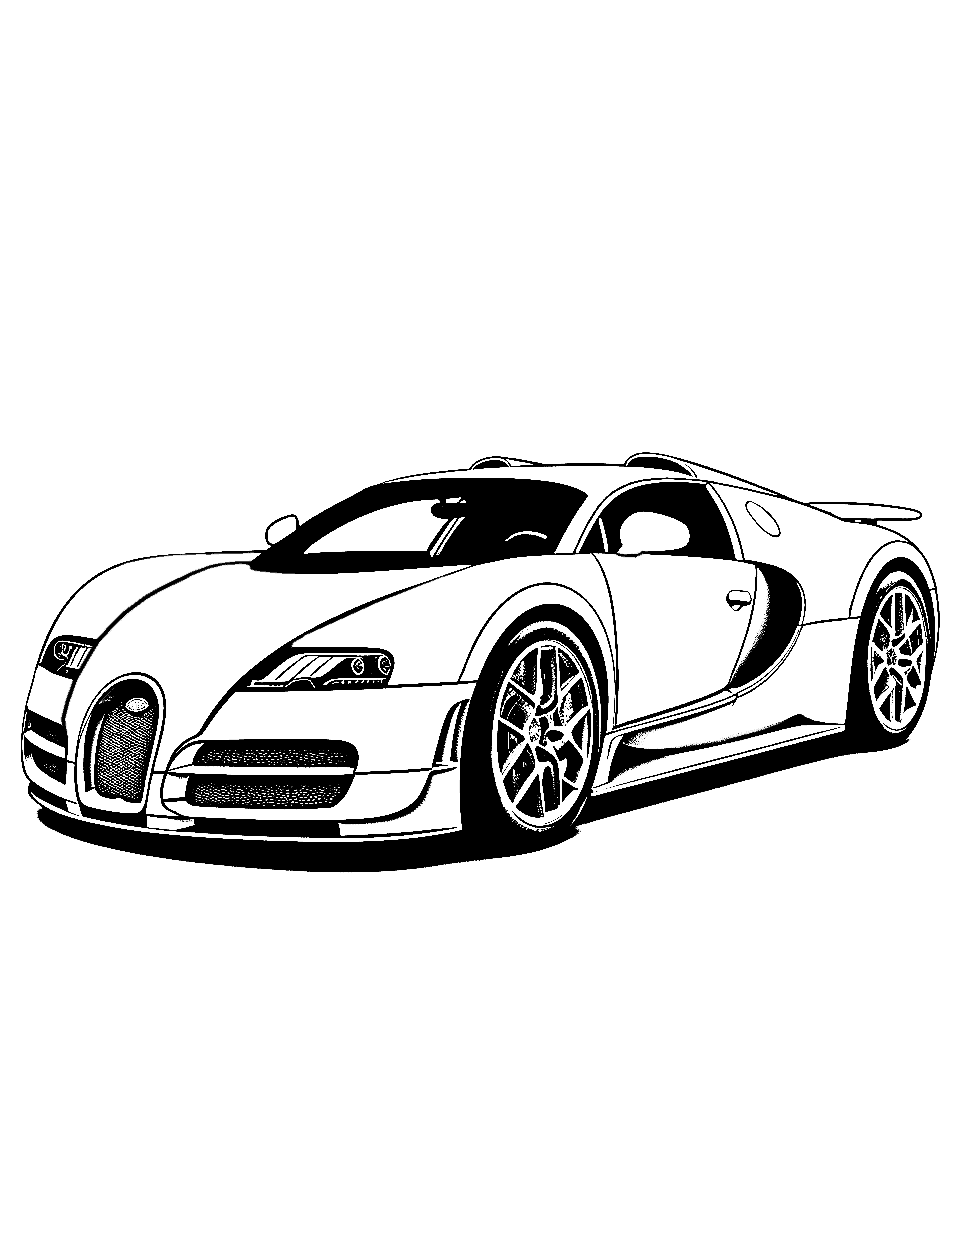 Bugatti Blast Race Car Coloring Page - A Bugatti car showing its high speed and luxury.